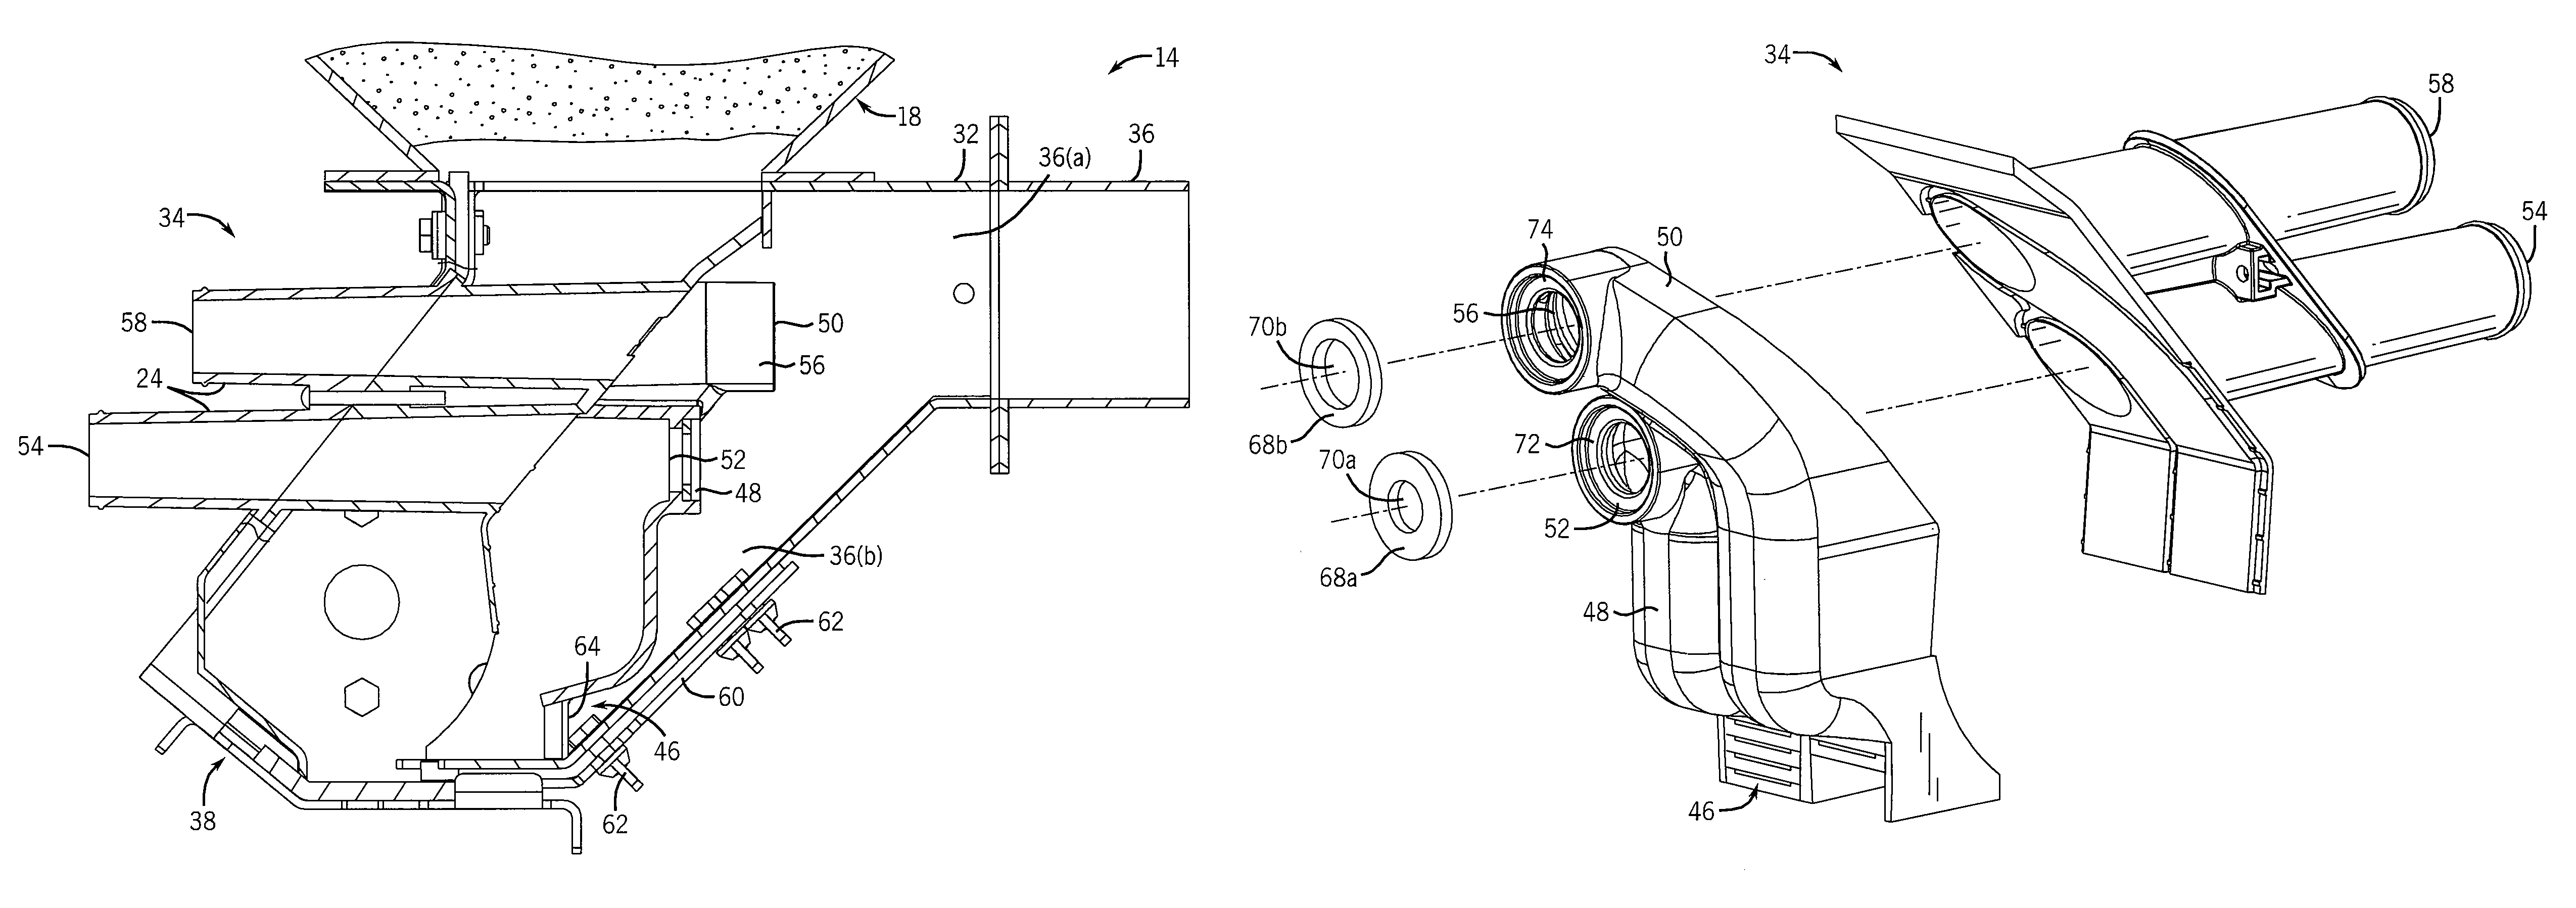 Inductor assembly for a product conveyance system